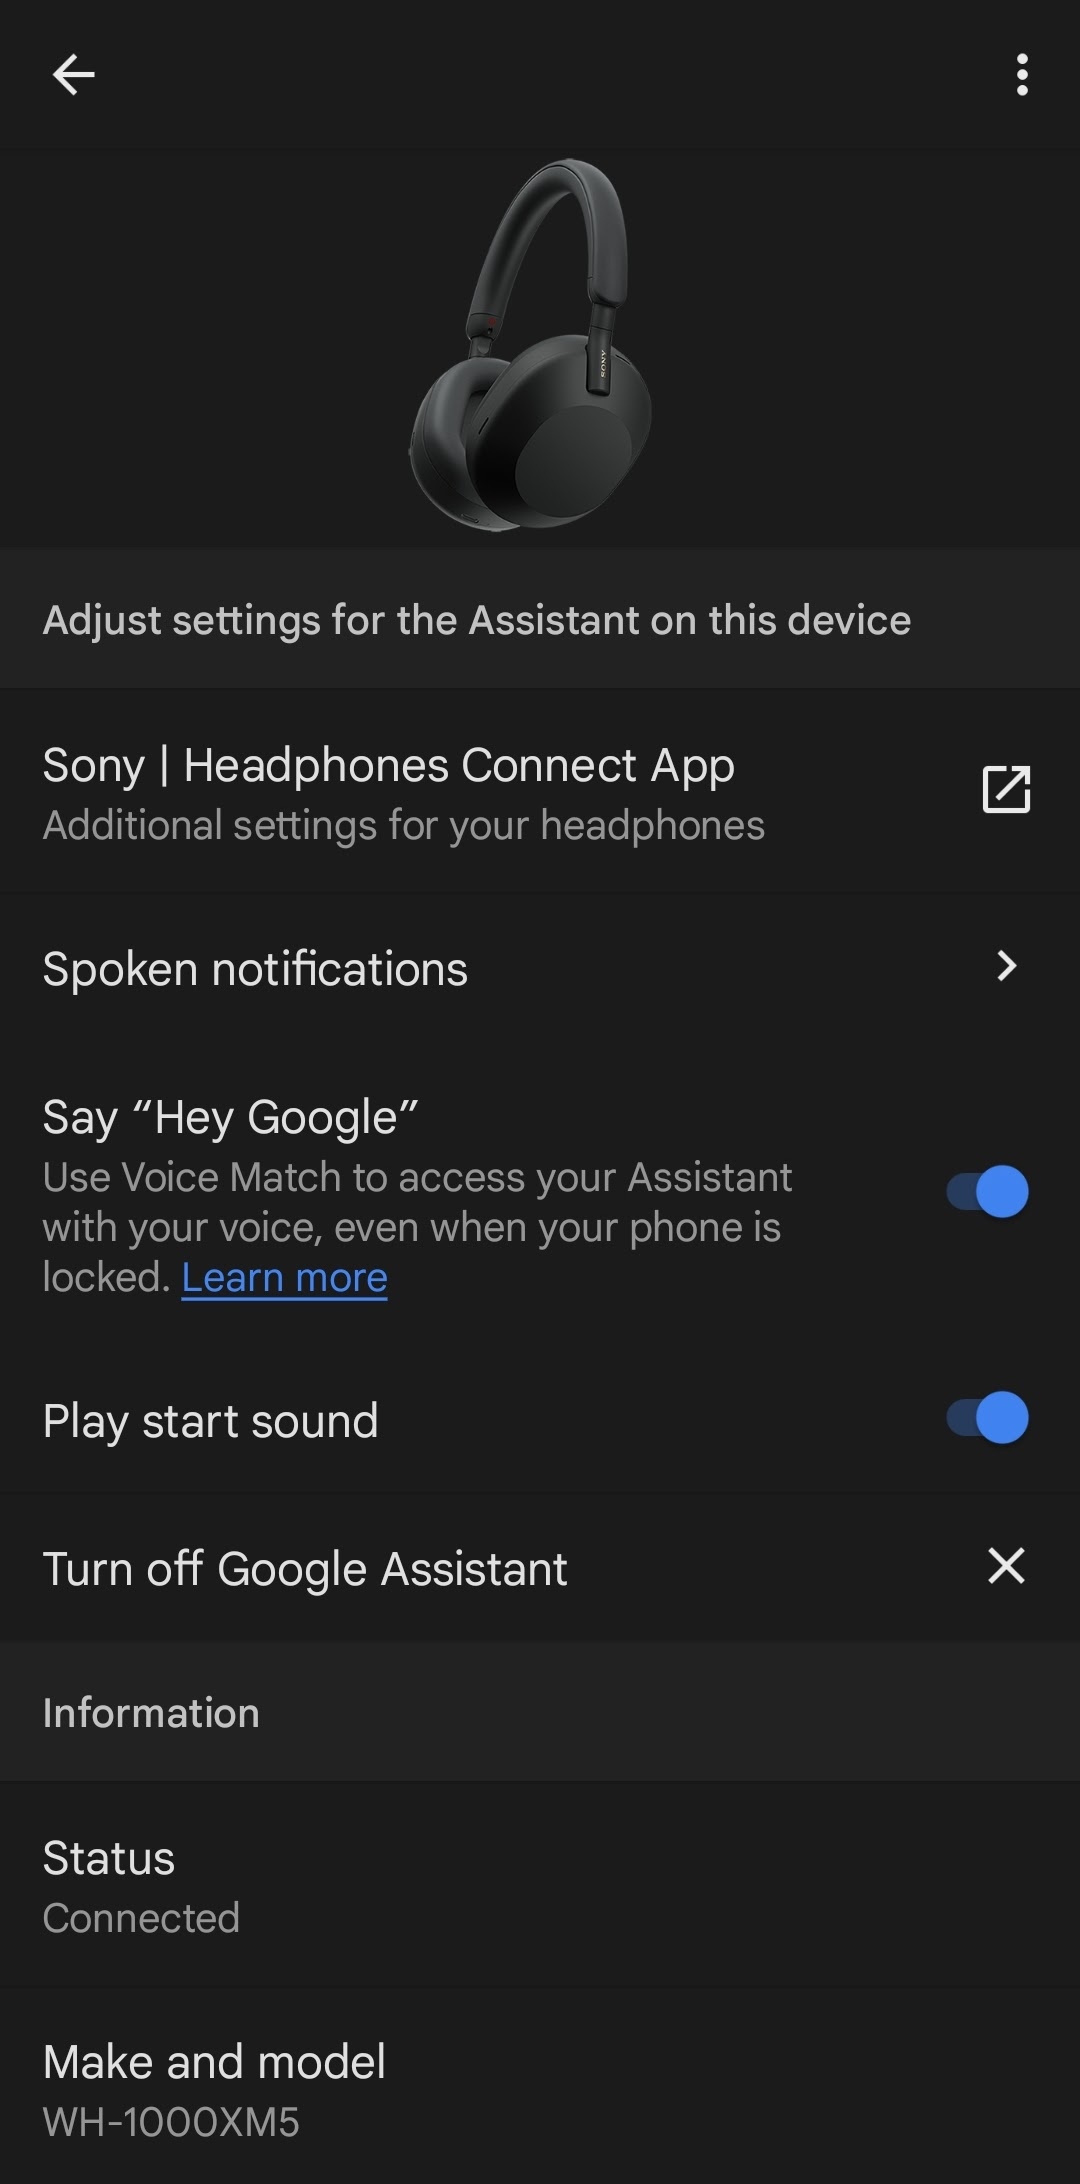 Unable to access google assistant with voice on my sony WH-1000XM5 